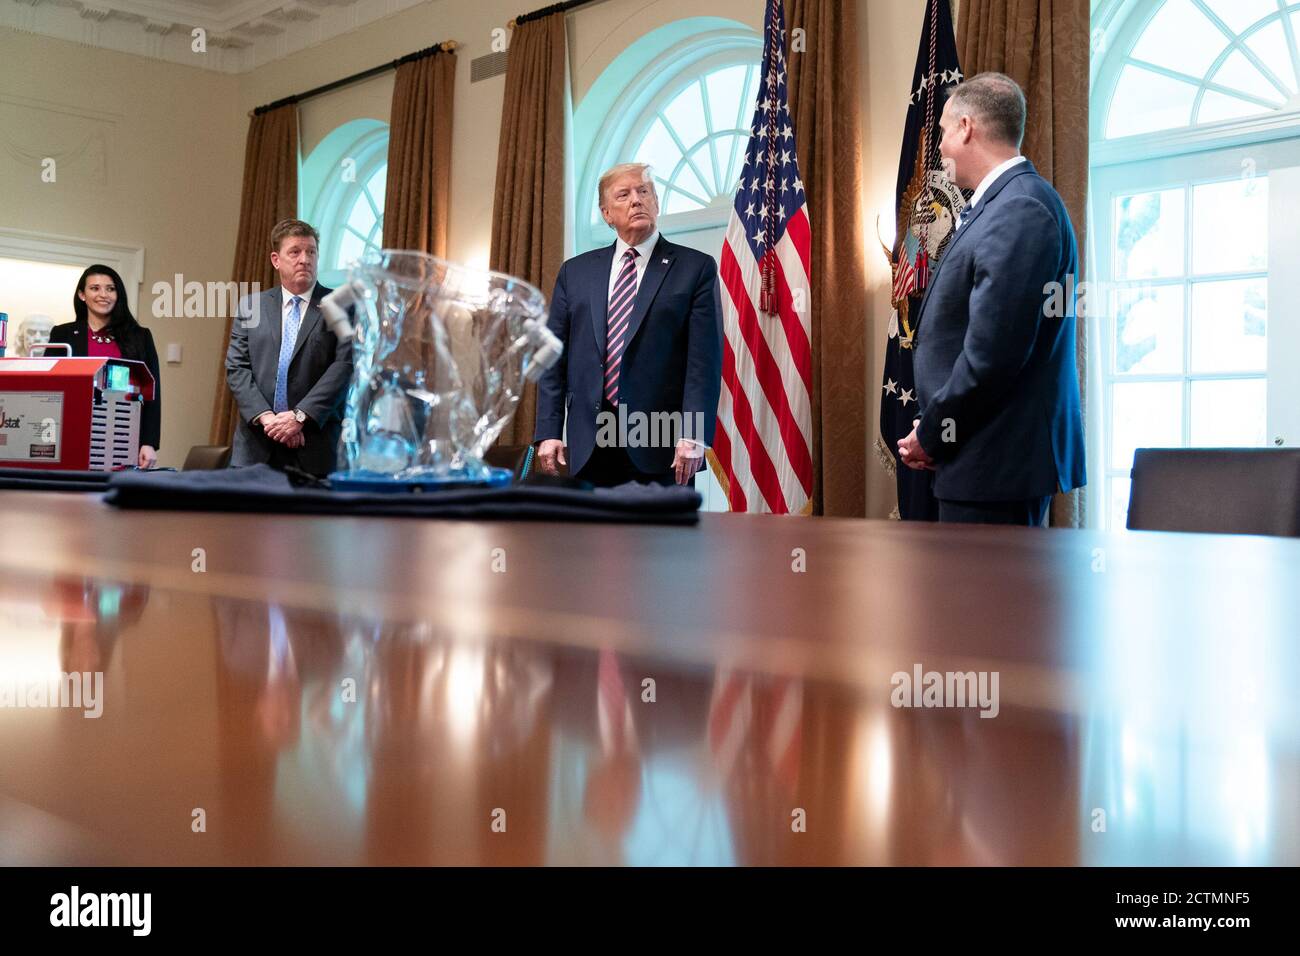 President Trump at a Briefing with NASA. President Donald  J. Trump listens during a briefing with NASA Administrator Jim Bridenstine and Dave Gallagher, Associate Director at the NASA Jet Propulsion Laboratory, discussing NASA’s response to the COIVD-19 Coronavirus Friday, April 24, 2020, in the Cabinet Room of the White House. Stock Photo